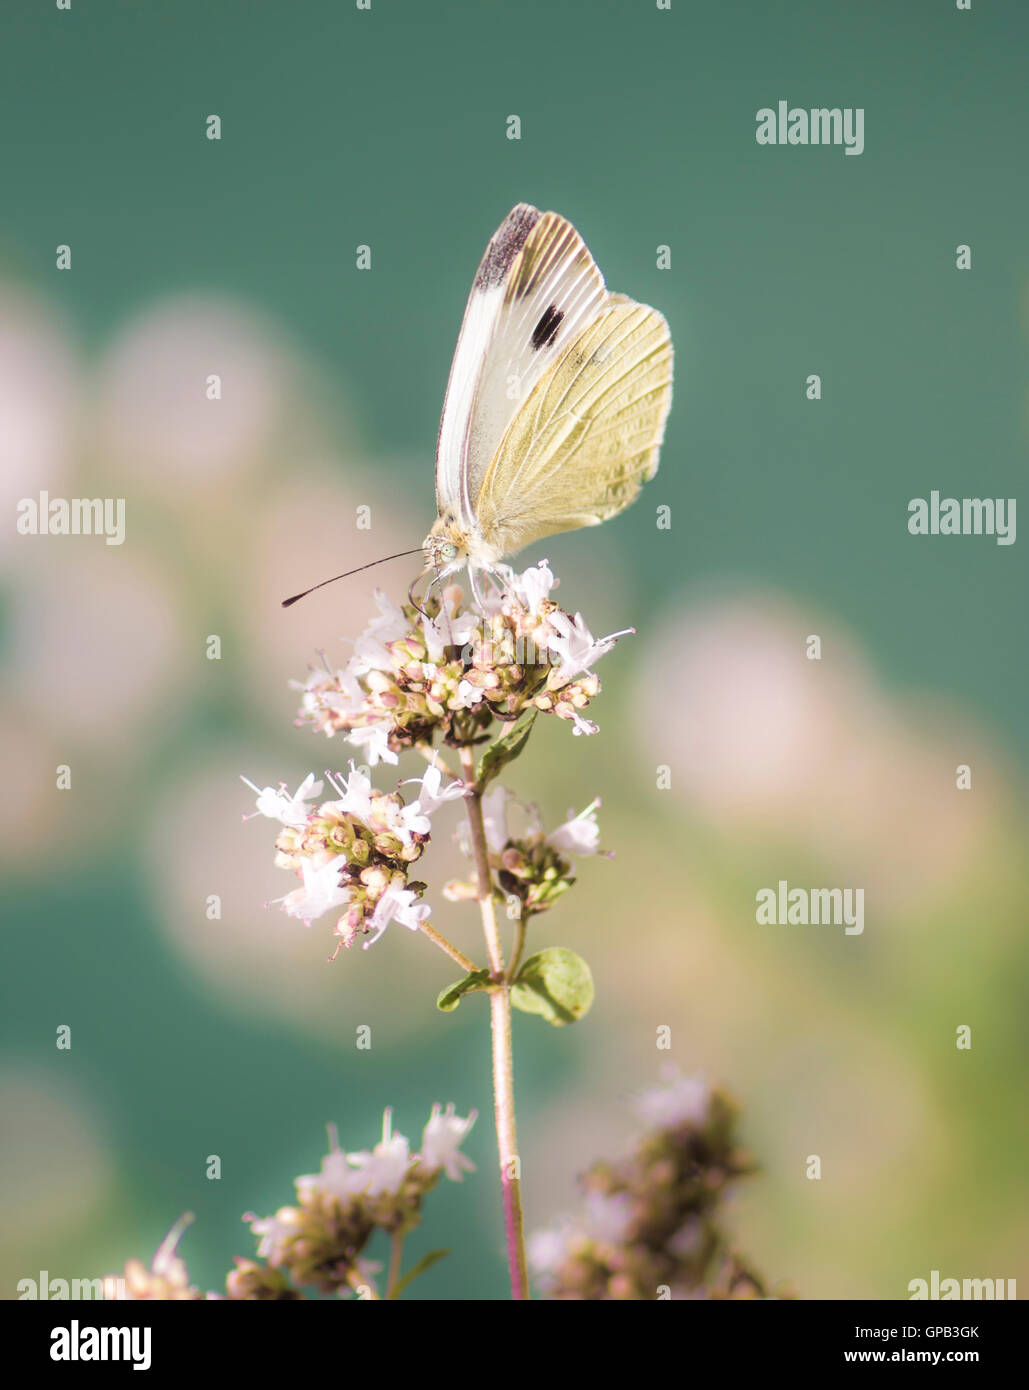 Closeup of a white cabbage butterfly on a flower Stock Photo